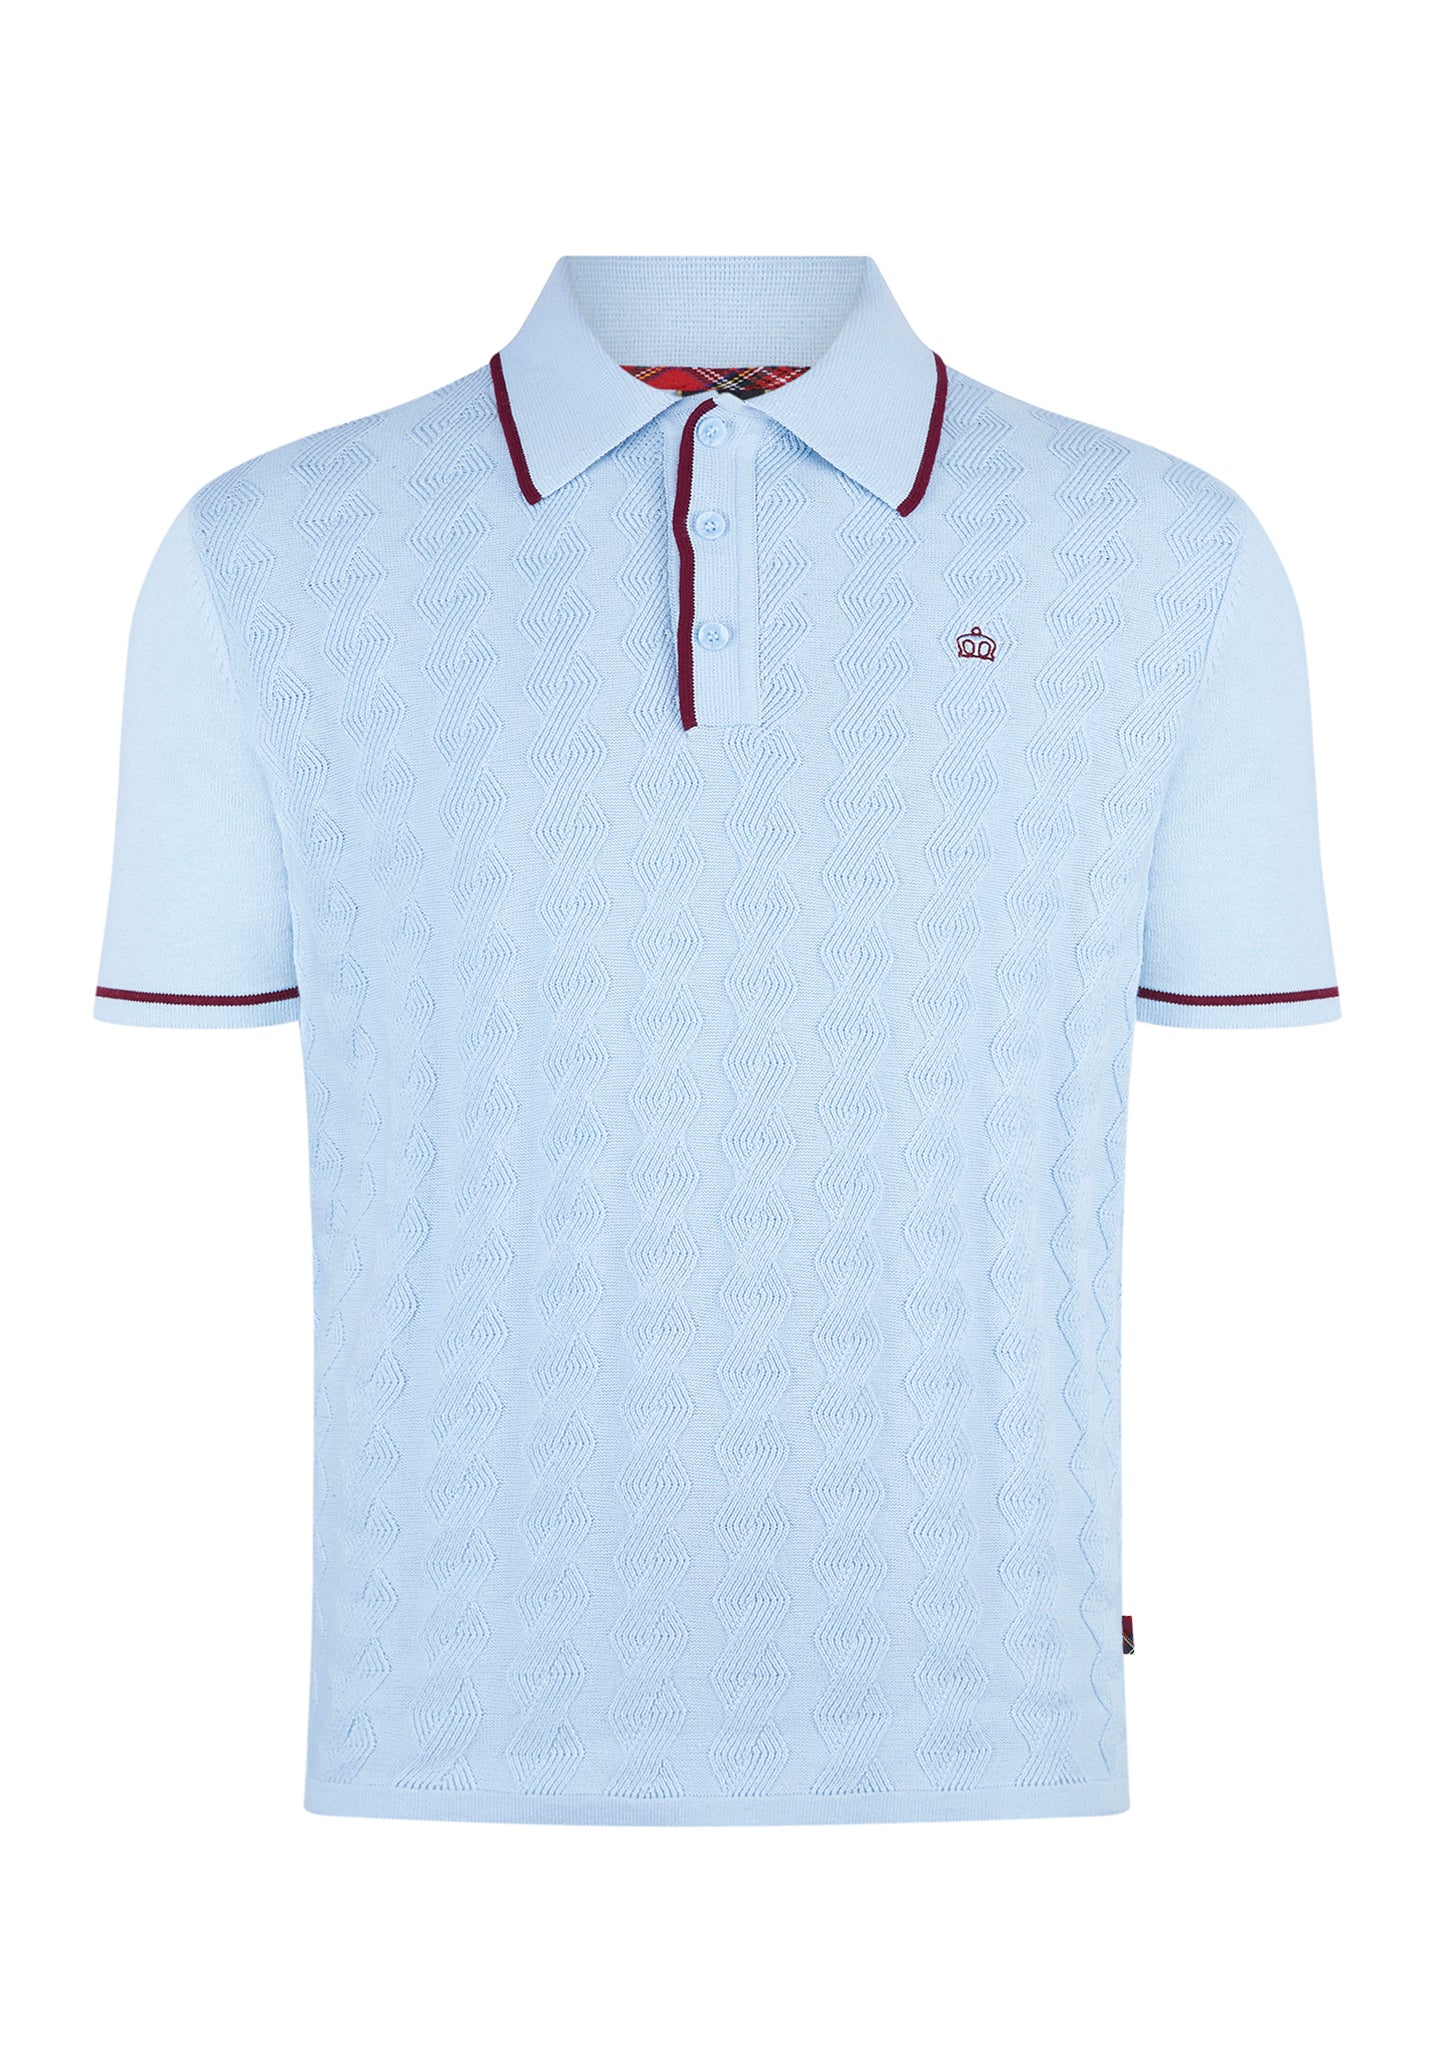 Blue Cable Knitted Polo Shirt by Merc London